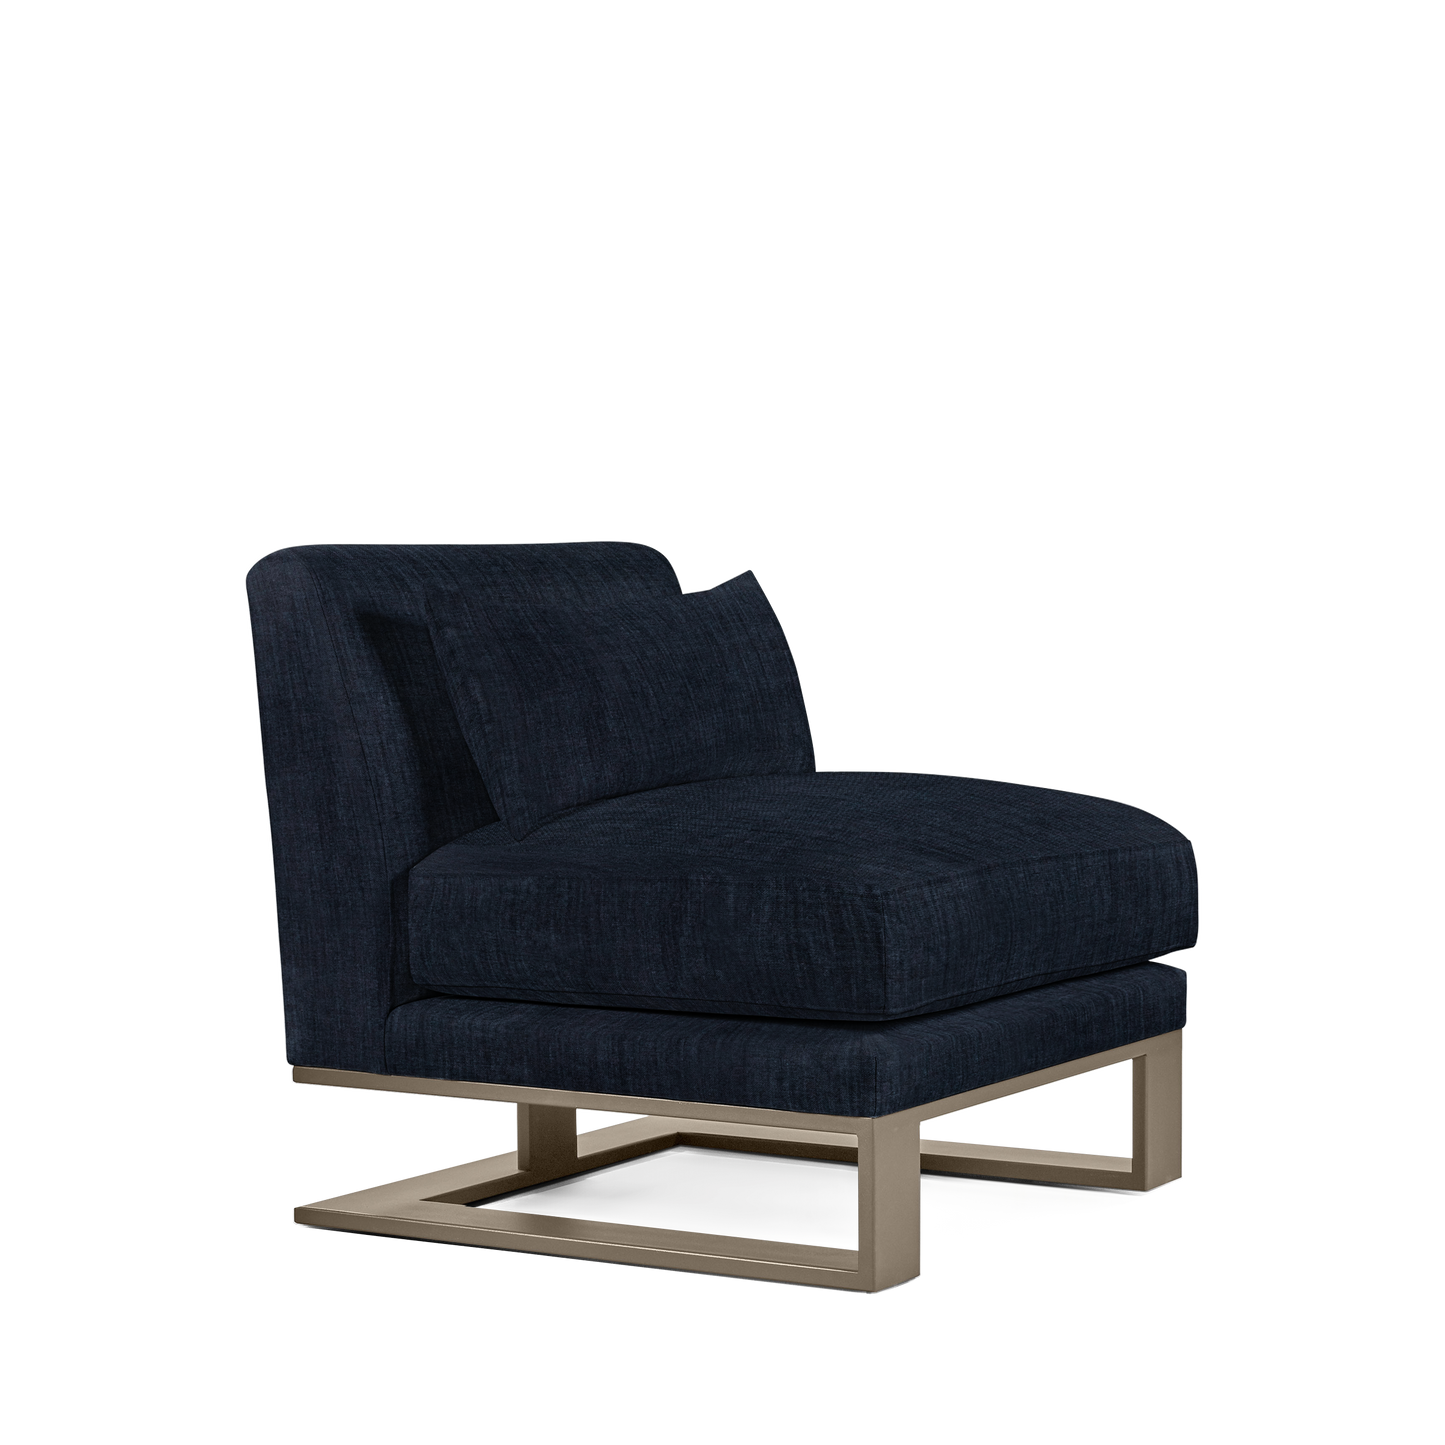 Alpes armchair with dark blue textile and champagne colored wood legs 